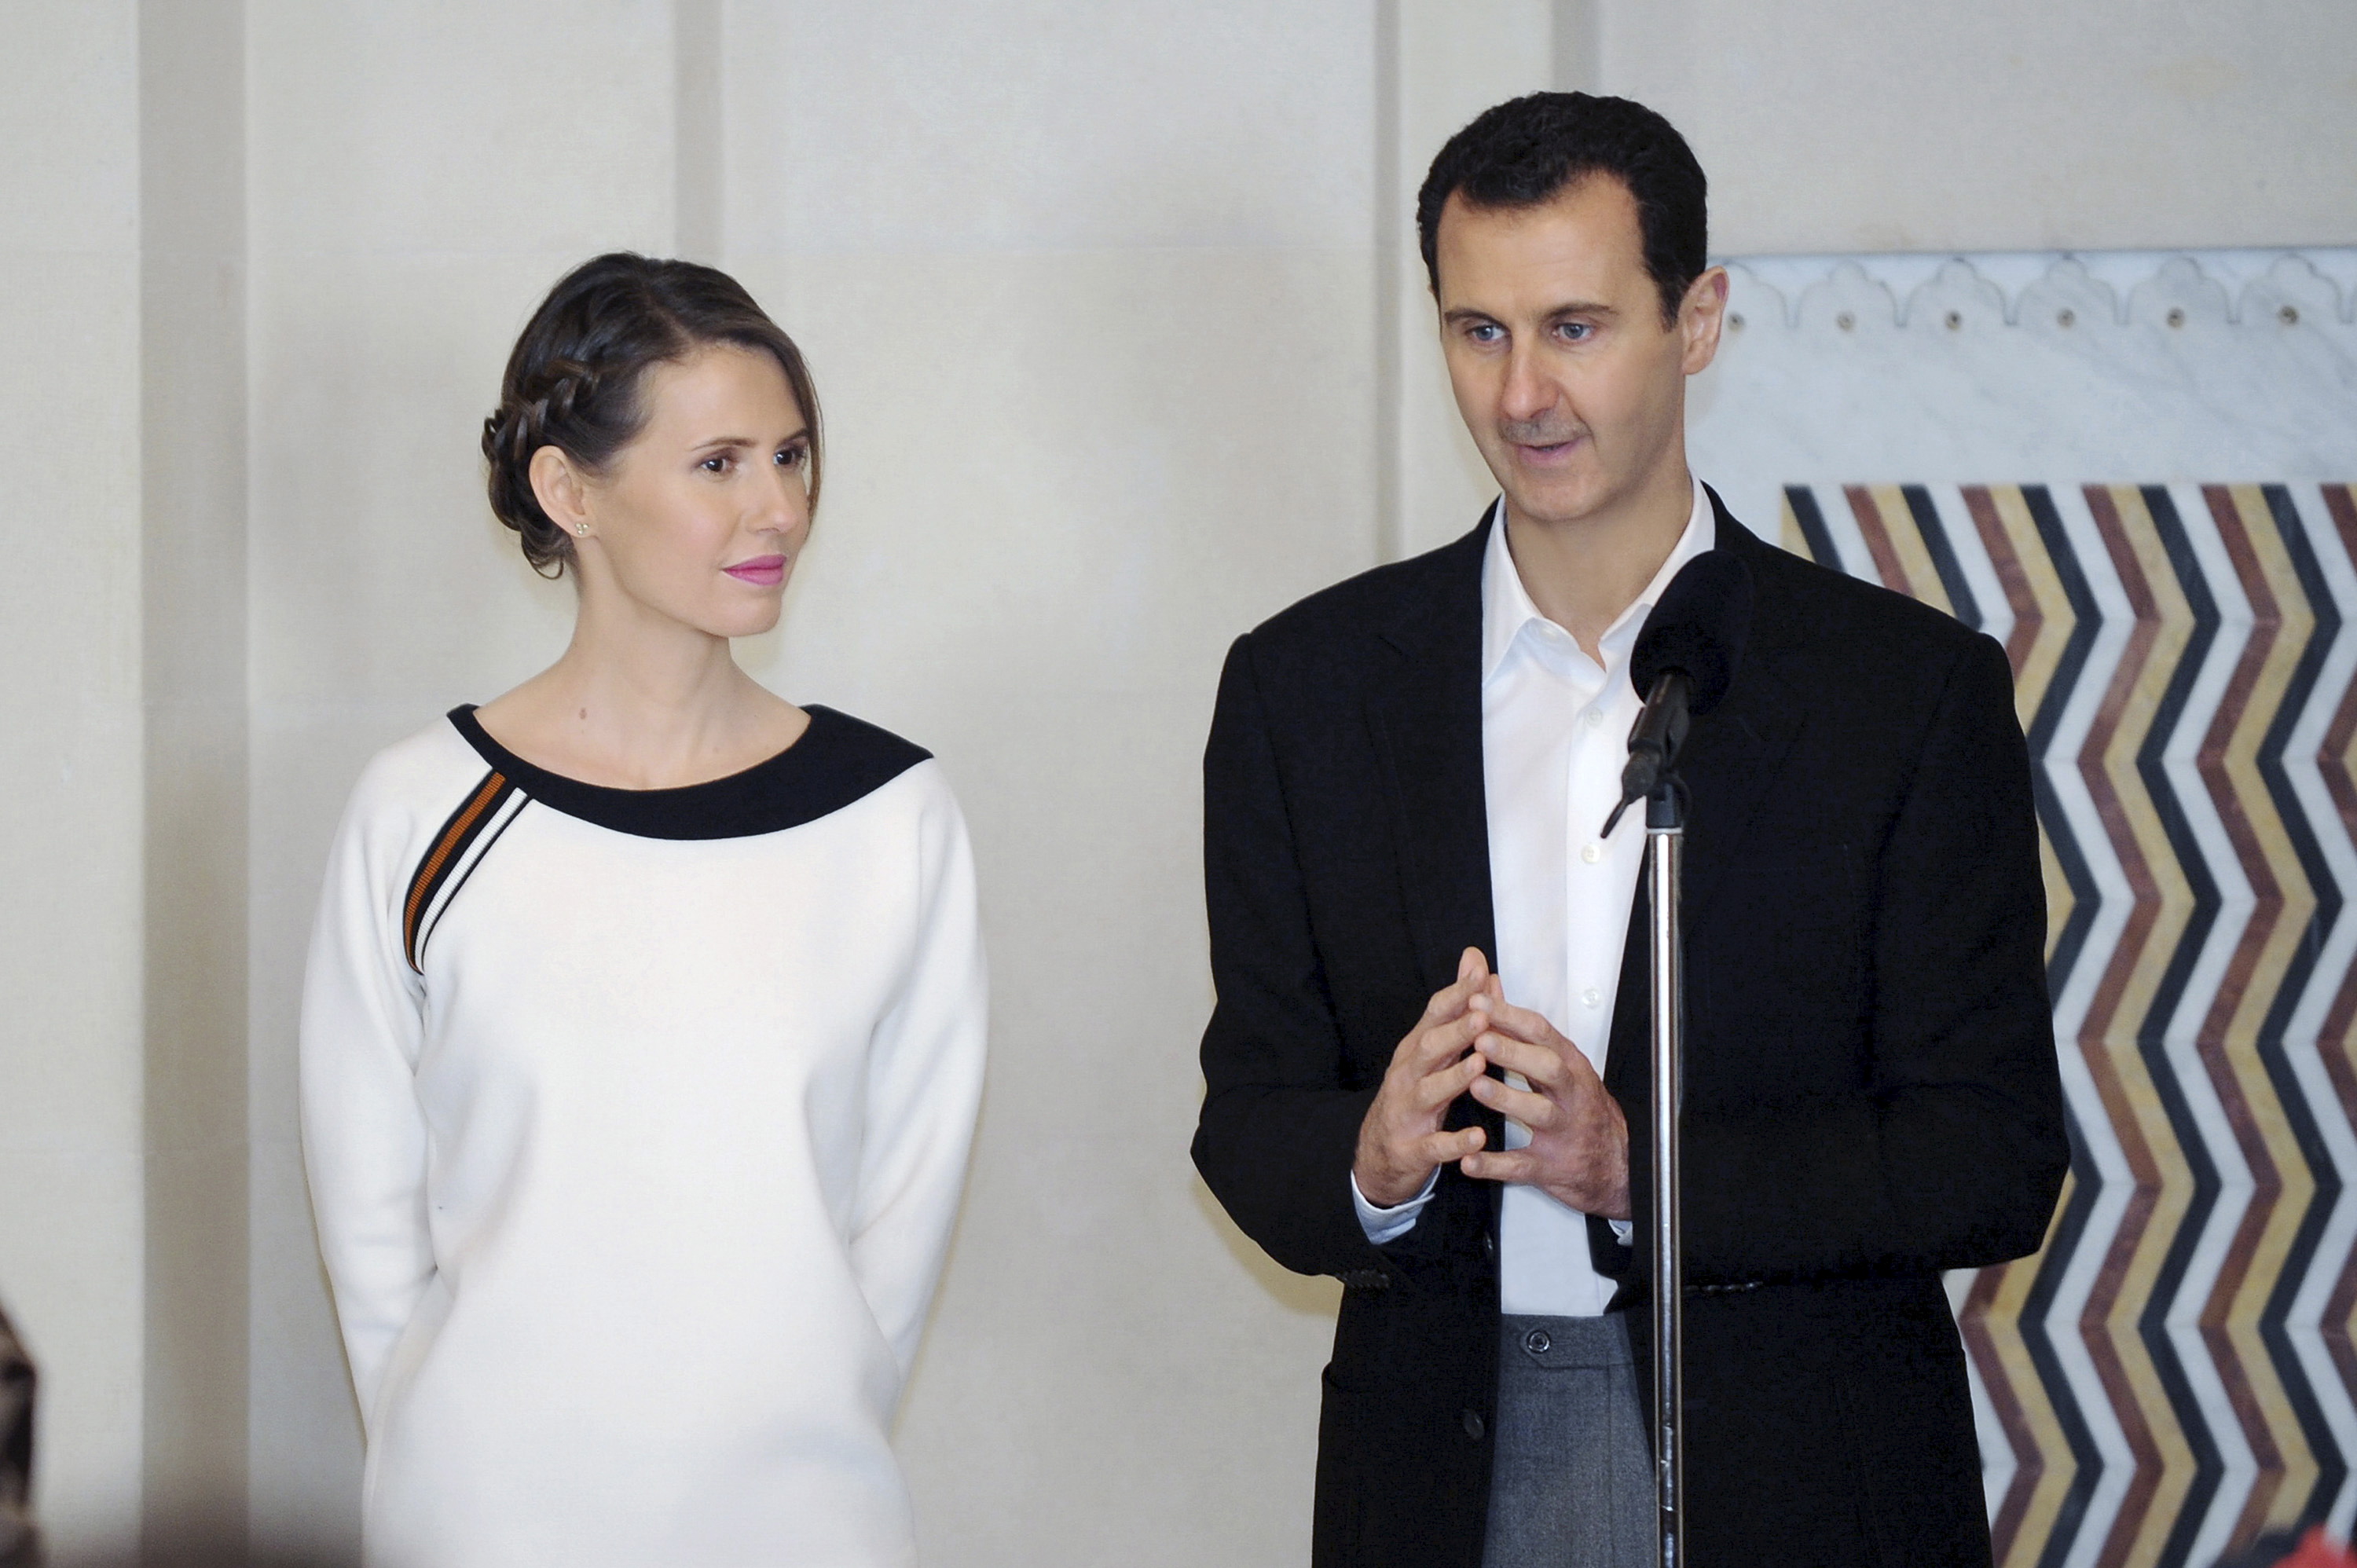 Syria's President Bashar al-Assad stands next to his wife Asma, as he addresses injured soldiers and their mothers during a celebration marking Syrian Mother's Day in Damascus